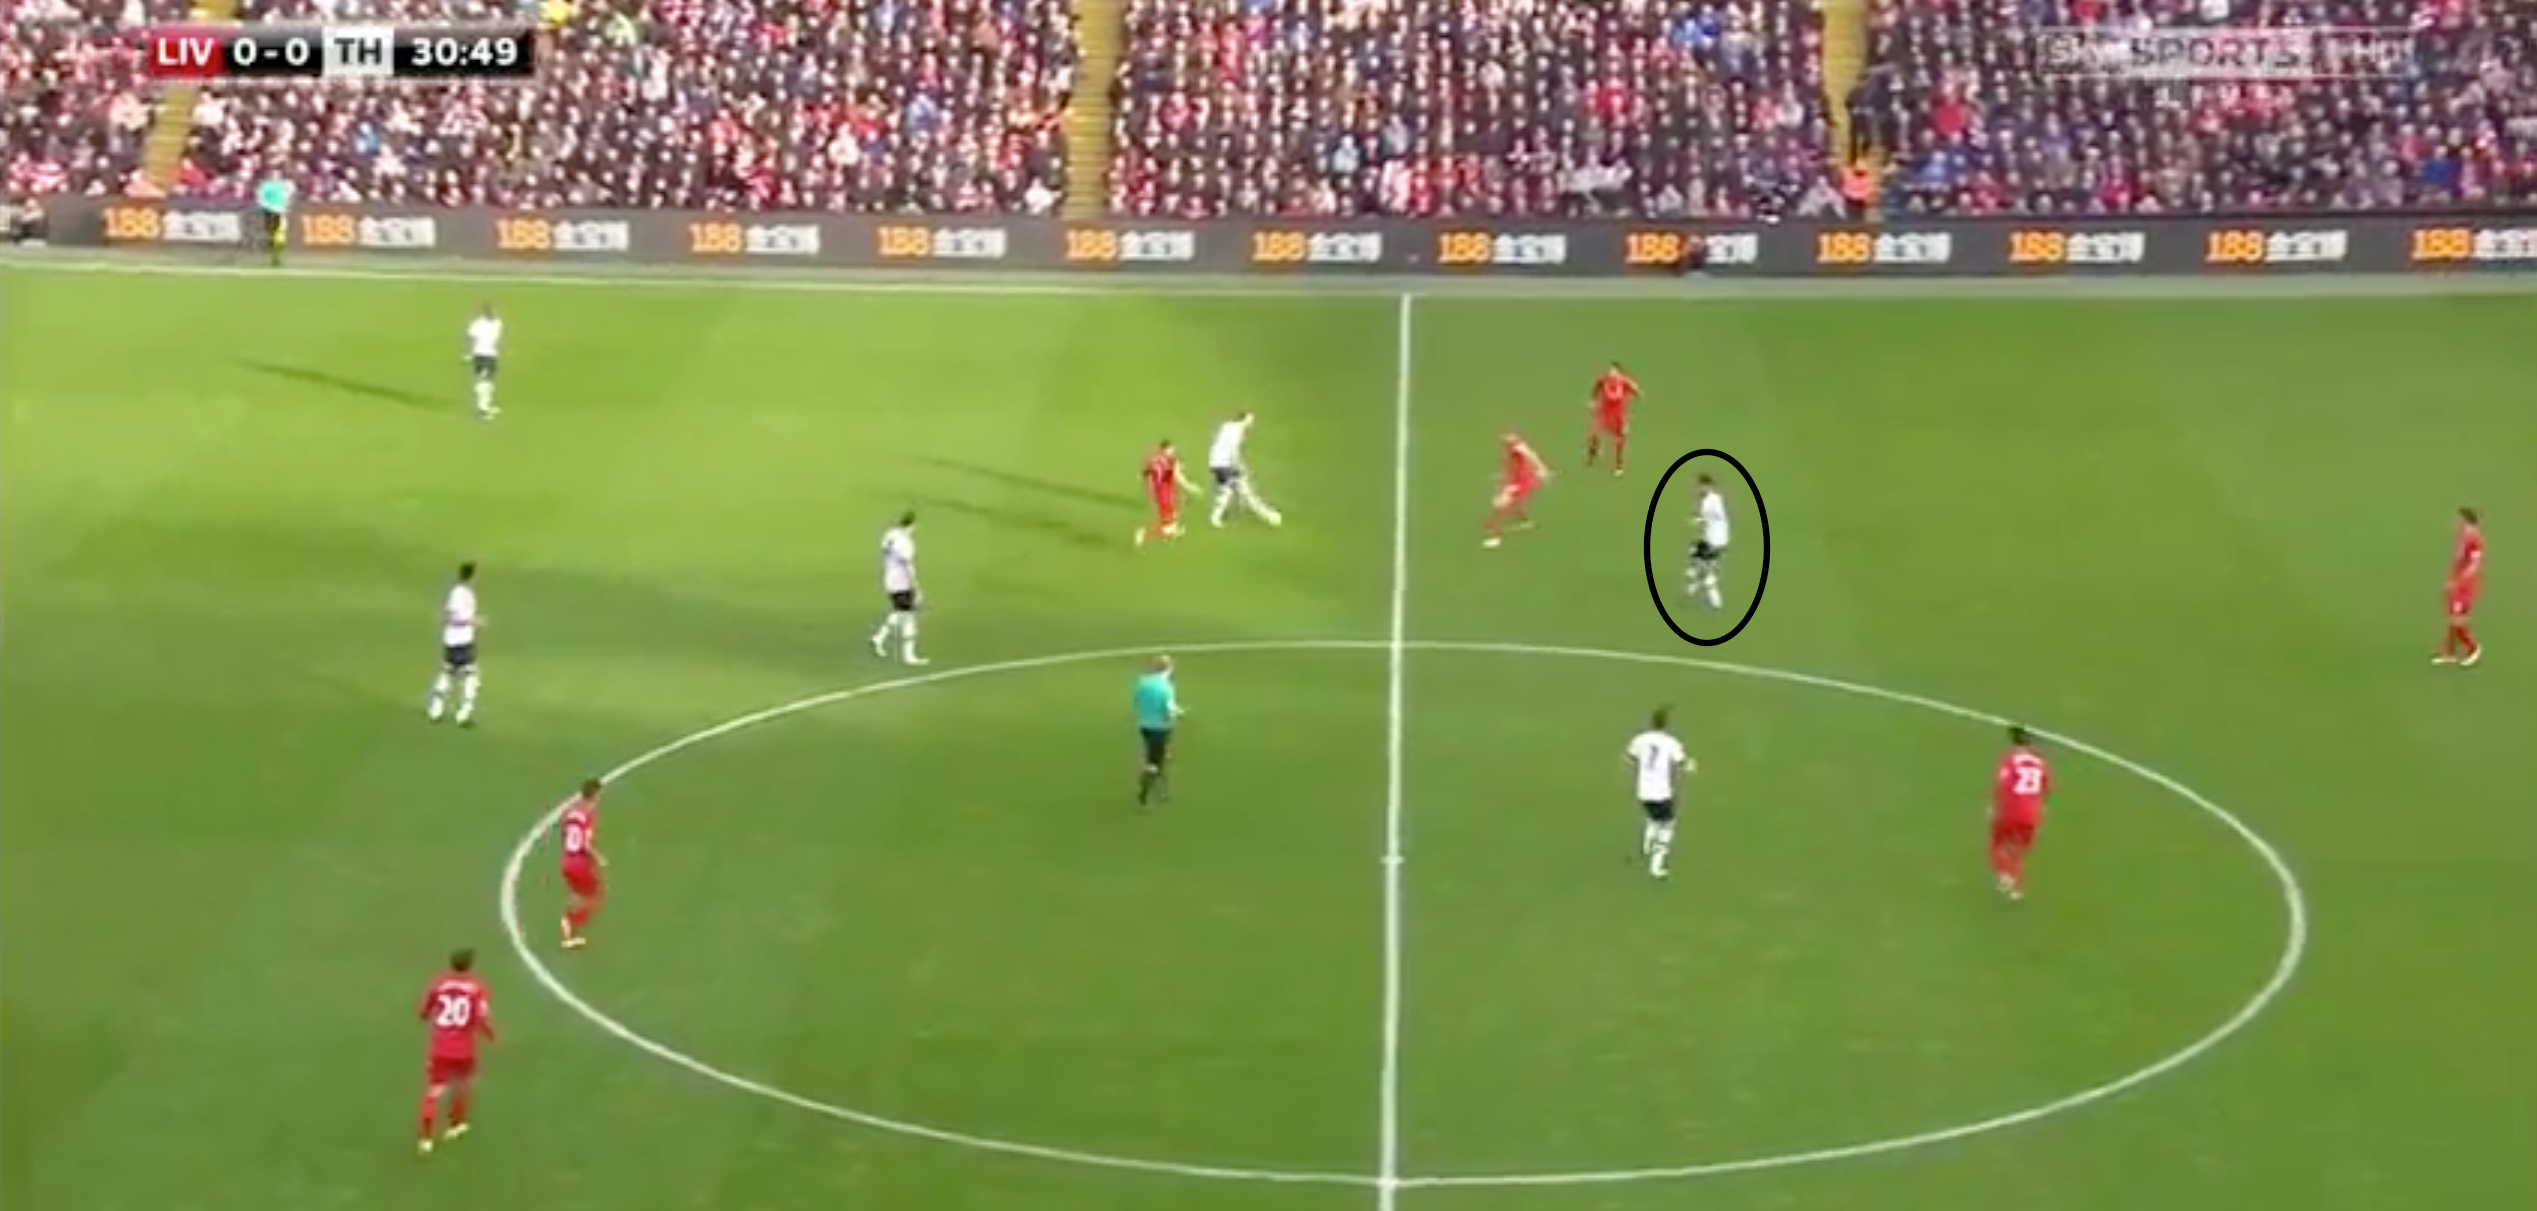 In a separate example, Alli is in another potentially good position between the lines.